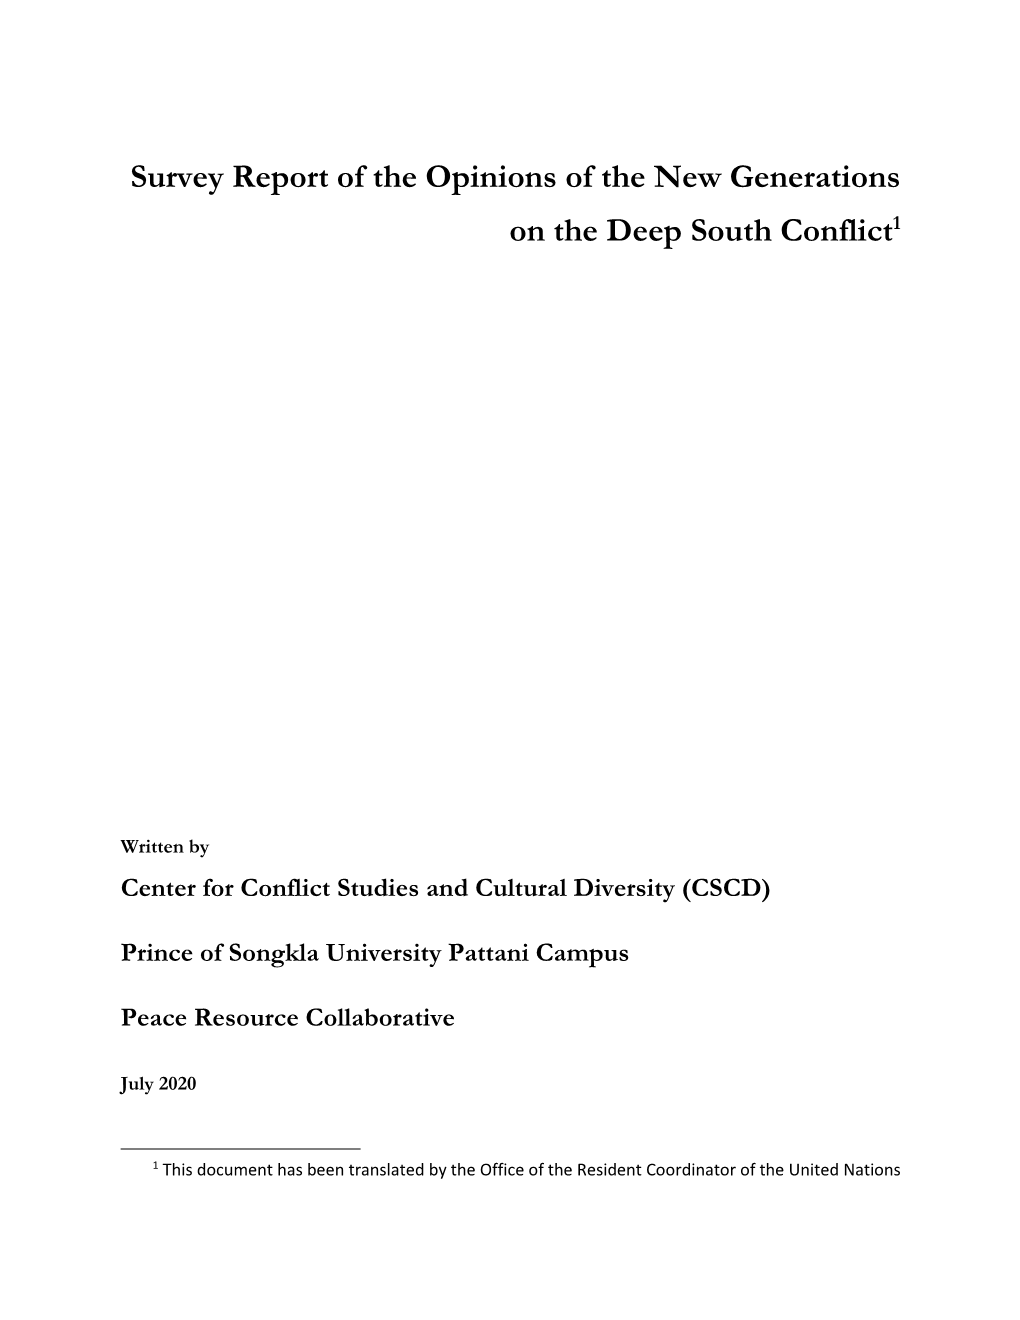 Survey Report of the Opinions of the New Generations on the Deep South Conflict1